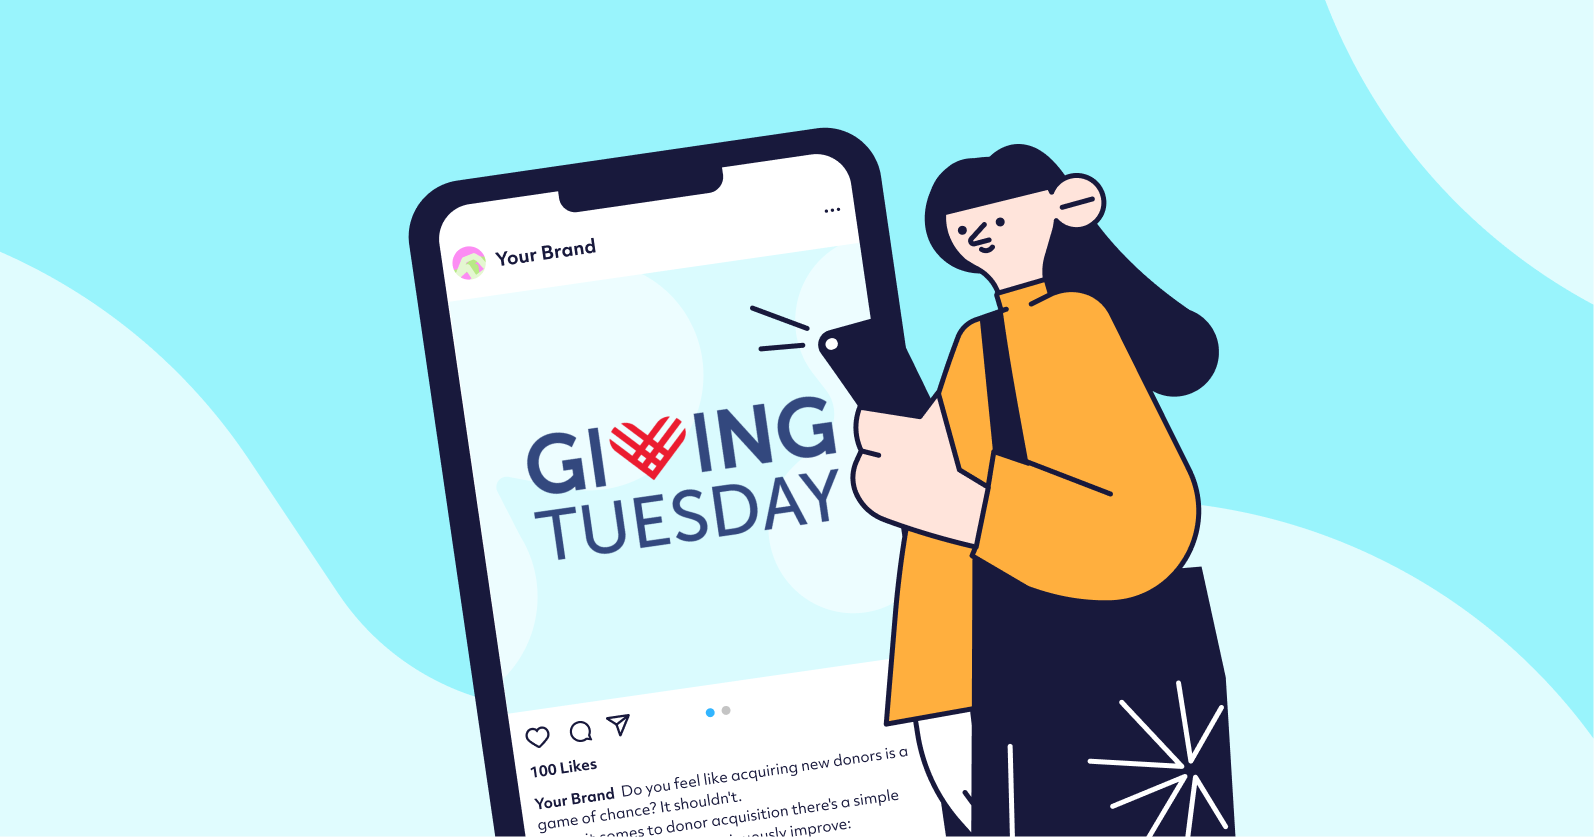 Illustration of a person looking at a GivingTuesday social media post on their phone.